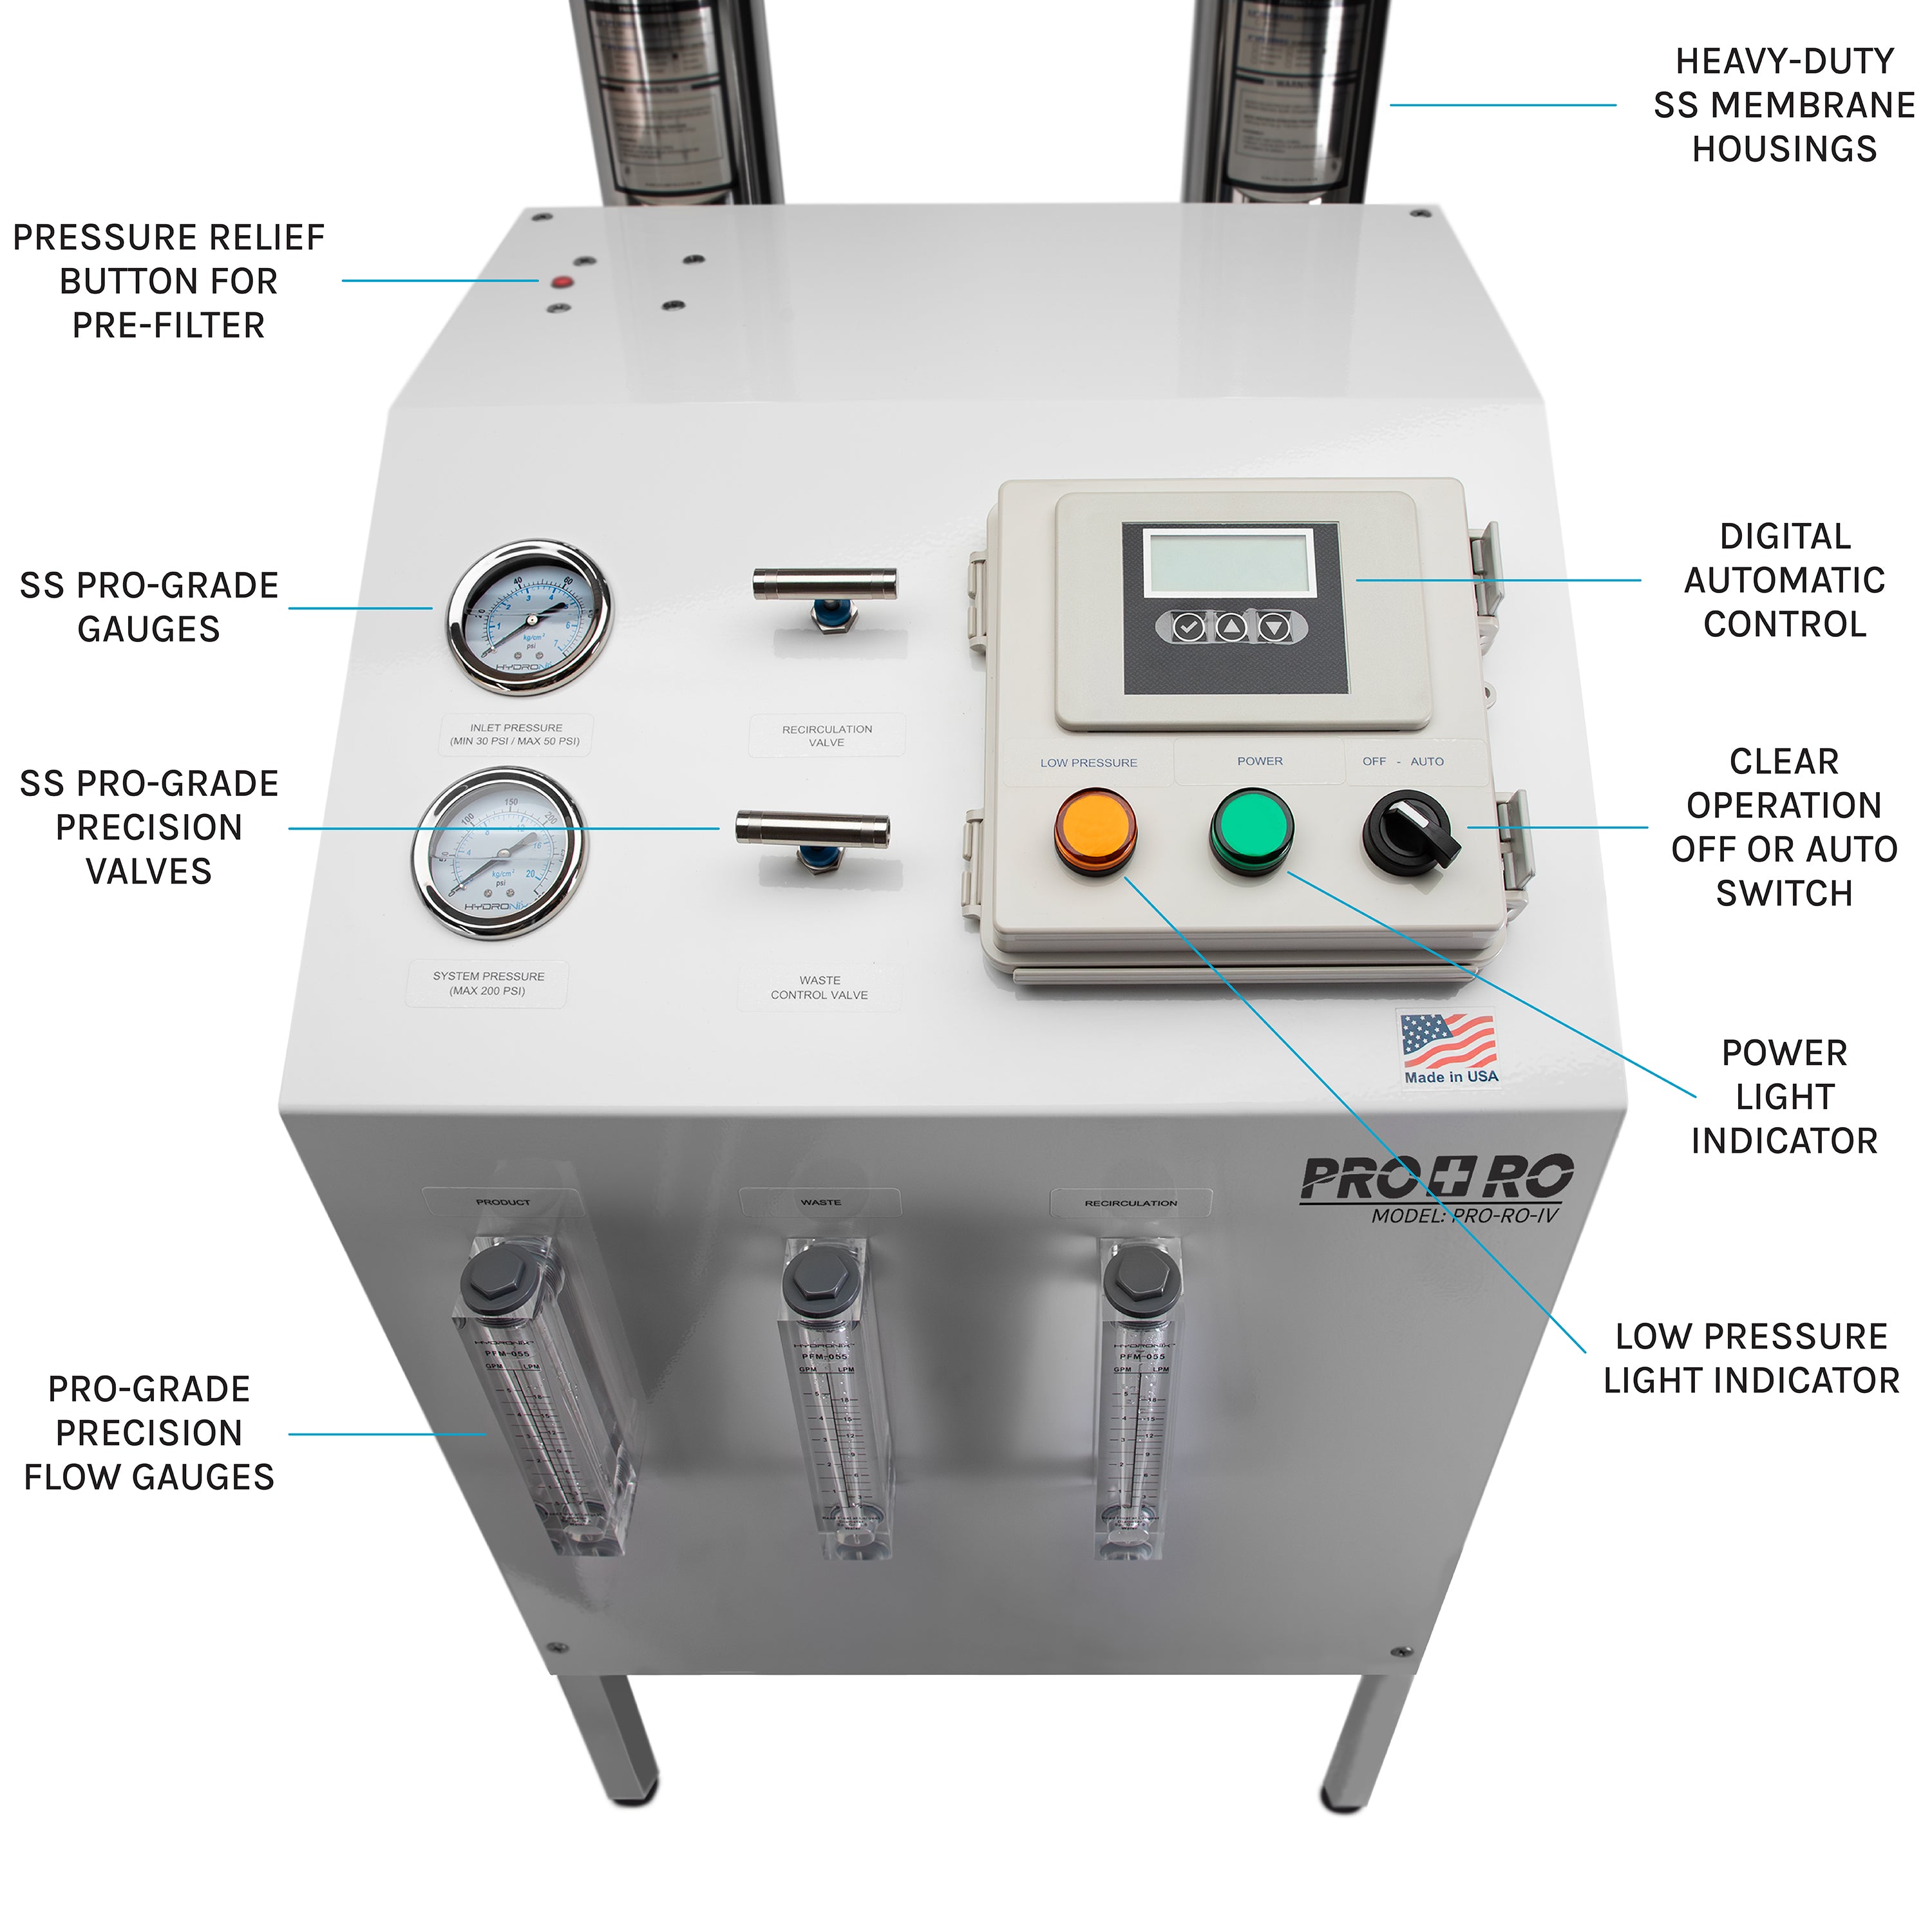 4000 GPD 3-Stage Commercial Reverse Osmosis Water Filter System